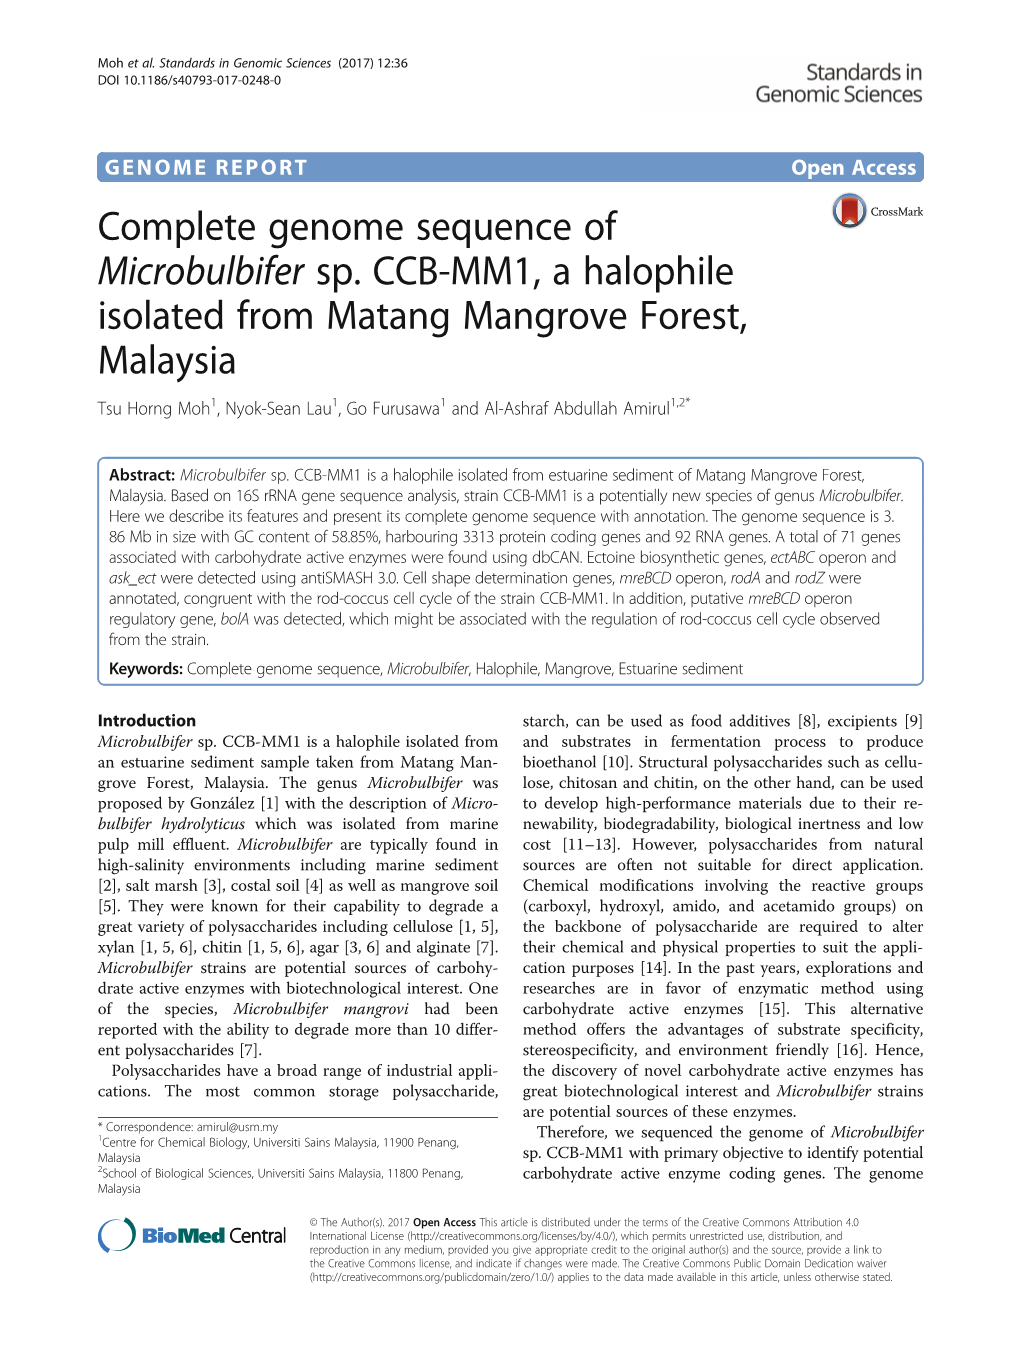 Complete Genome Sequence of Microbulbifer Sp. CCB-MM1, A